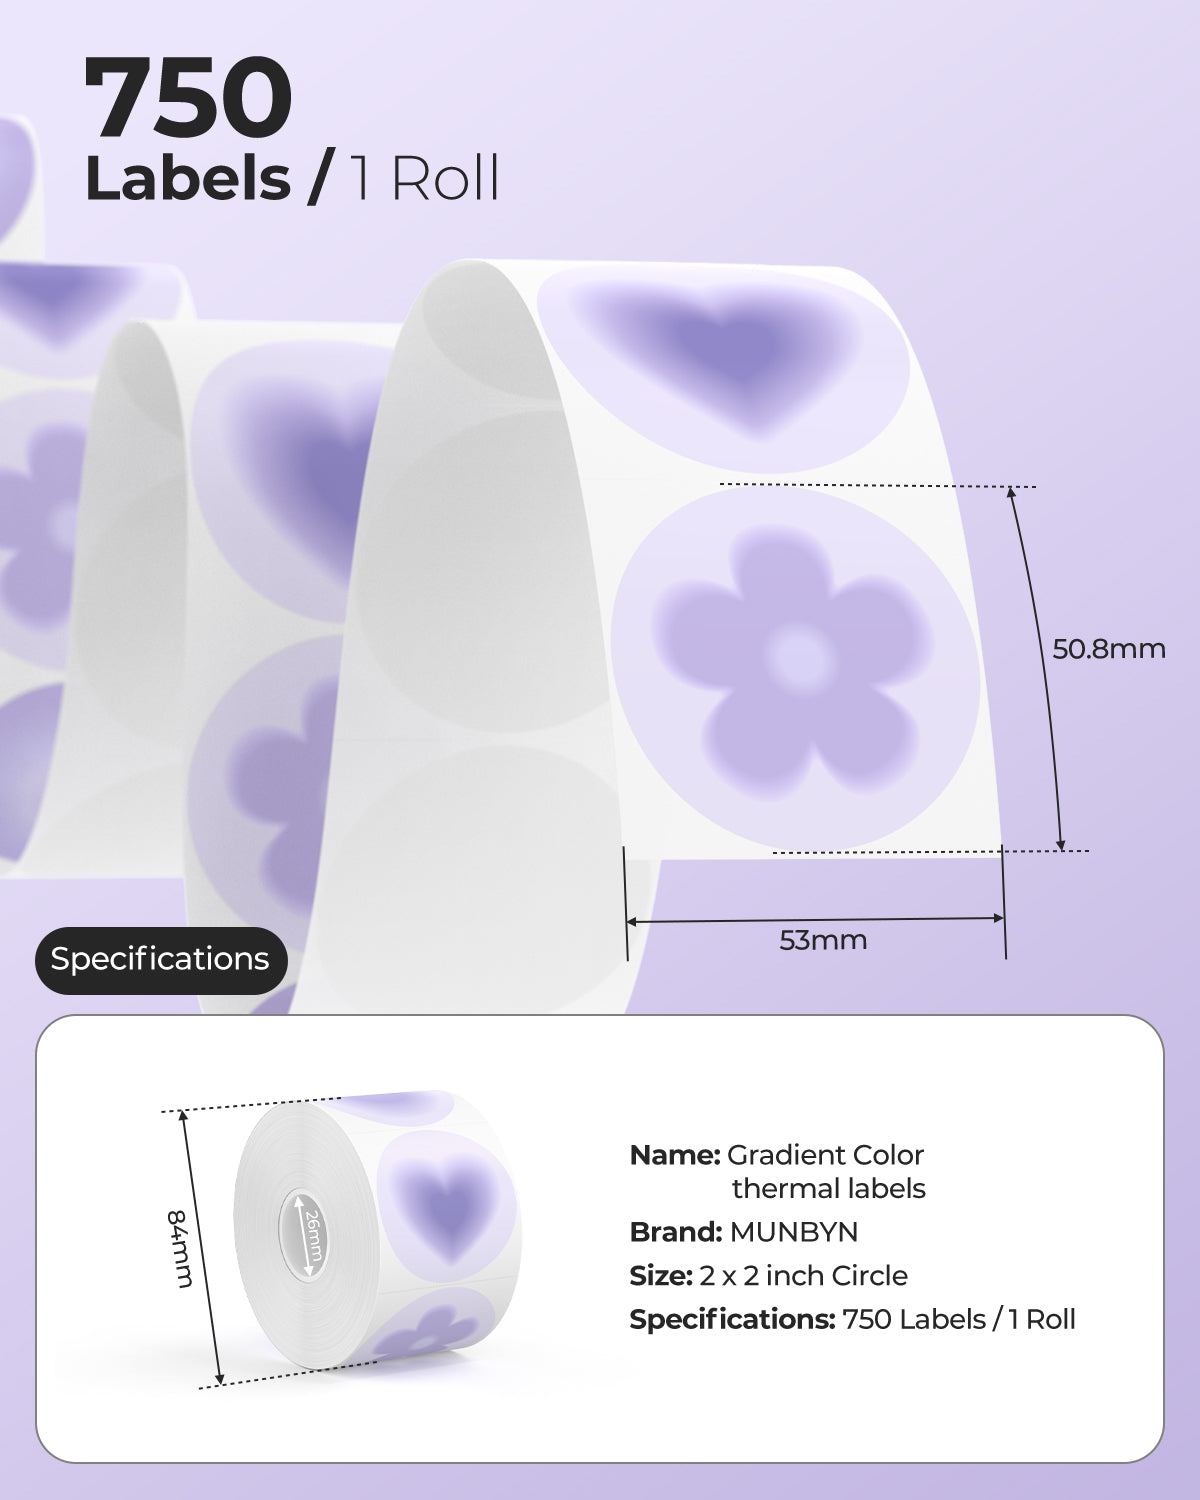 MUNBYN's decorative 2-inch circle thermal labels come with 750 labels per roll.